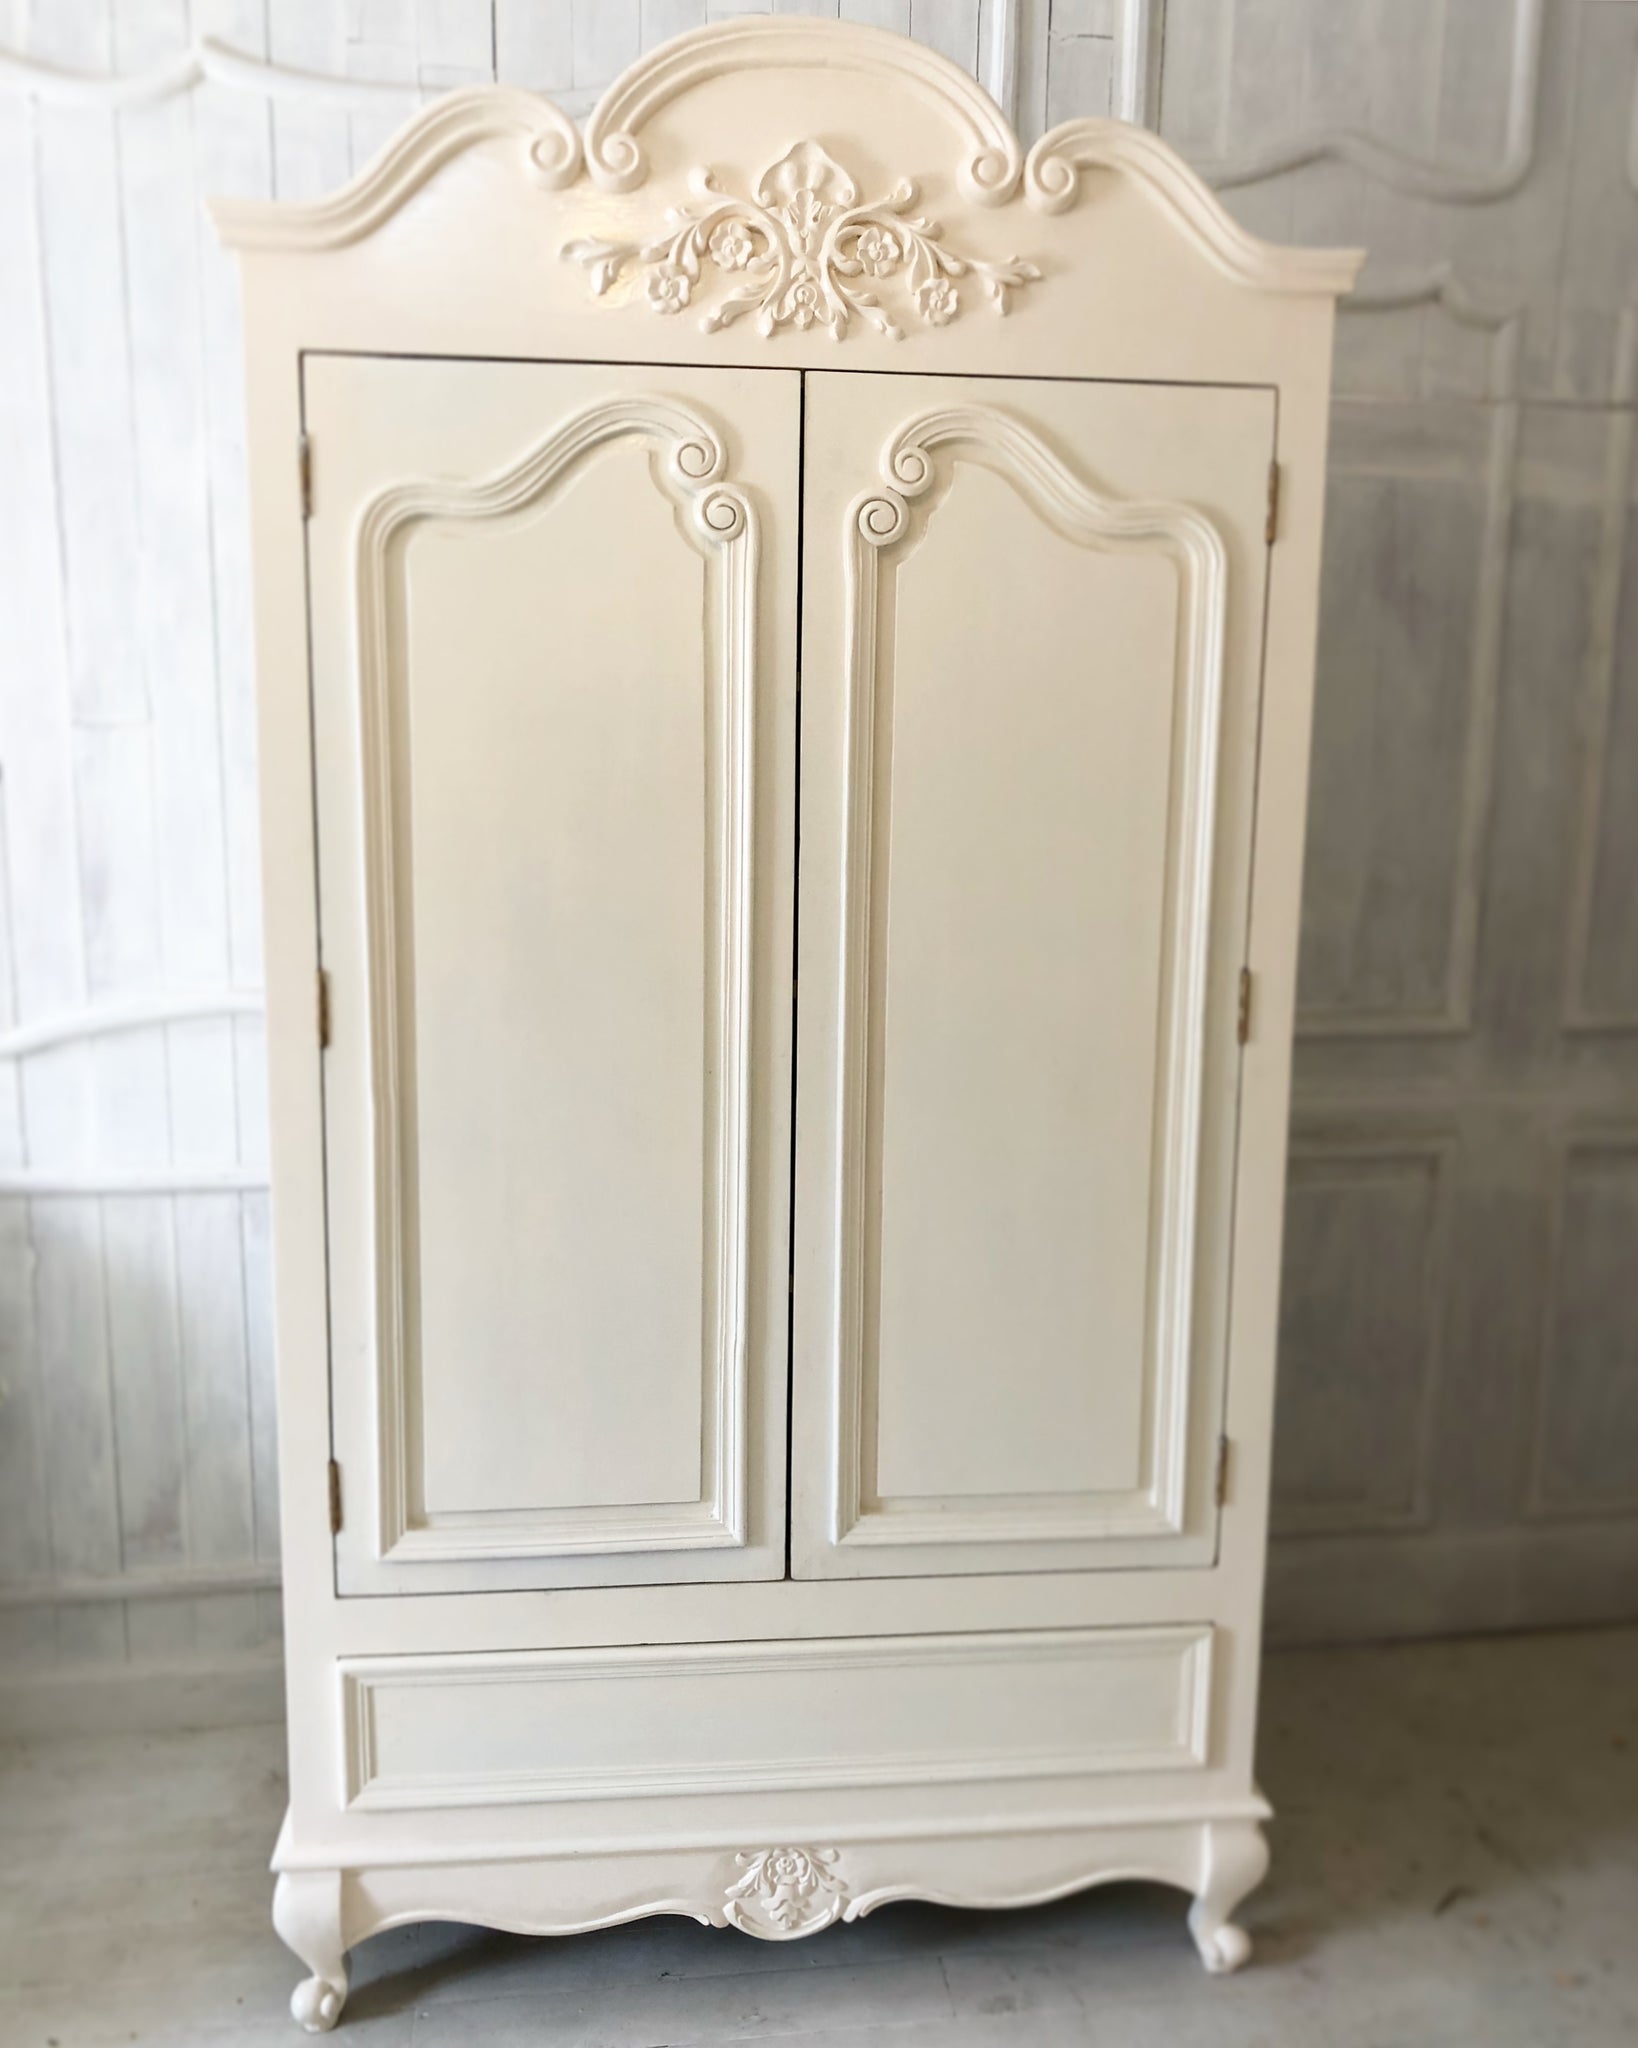 Armoire with a drawer and beautiful ornamentation